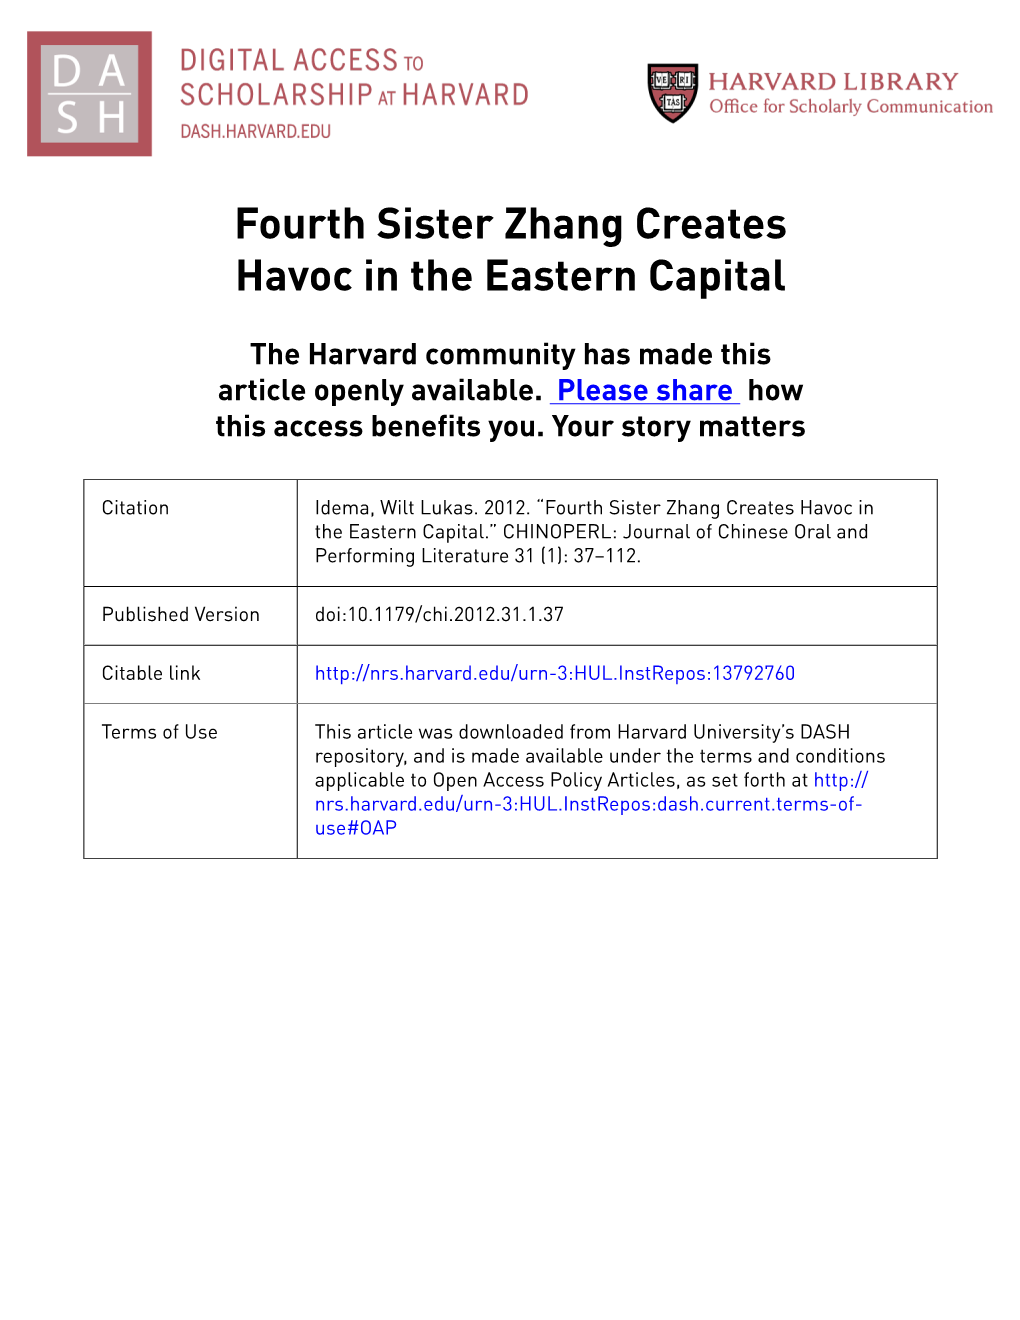 Fourth Sister Zhang Creates Havoc in the Eastern Capital